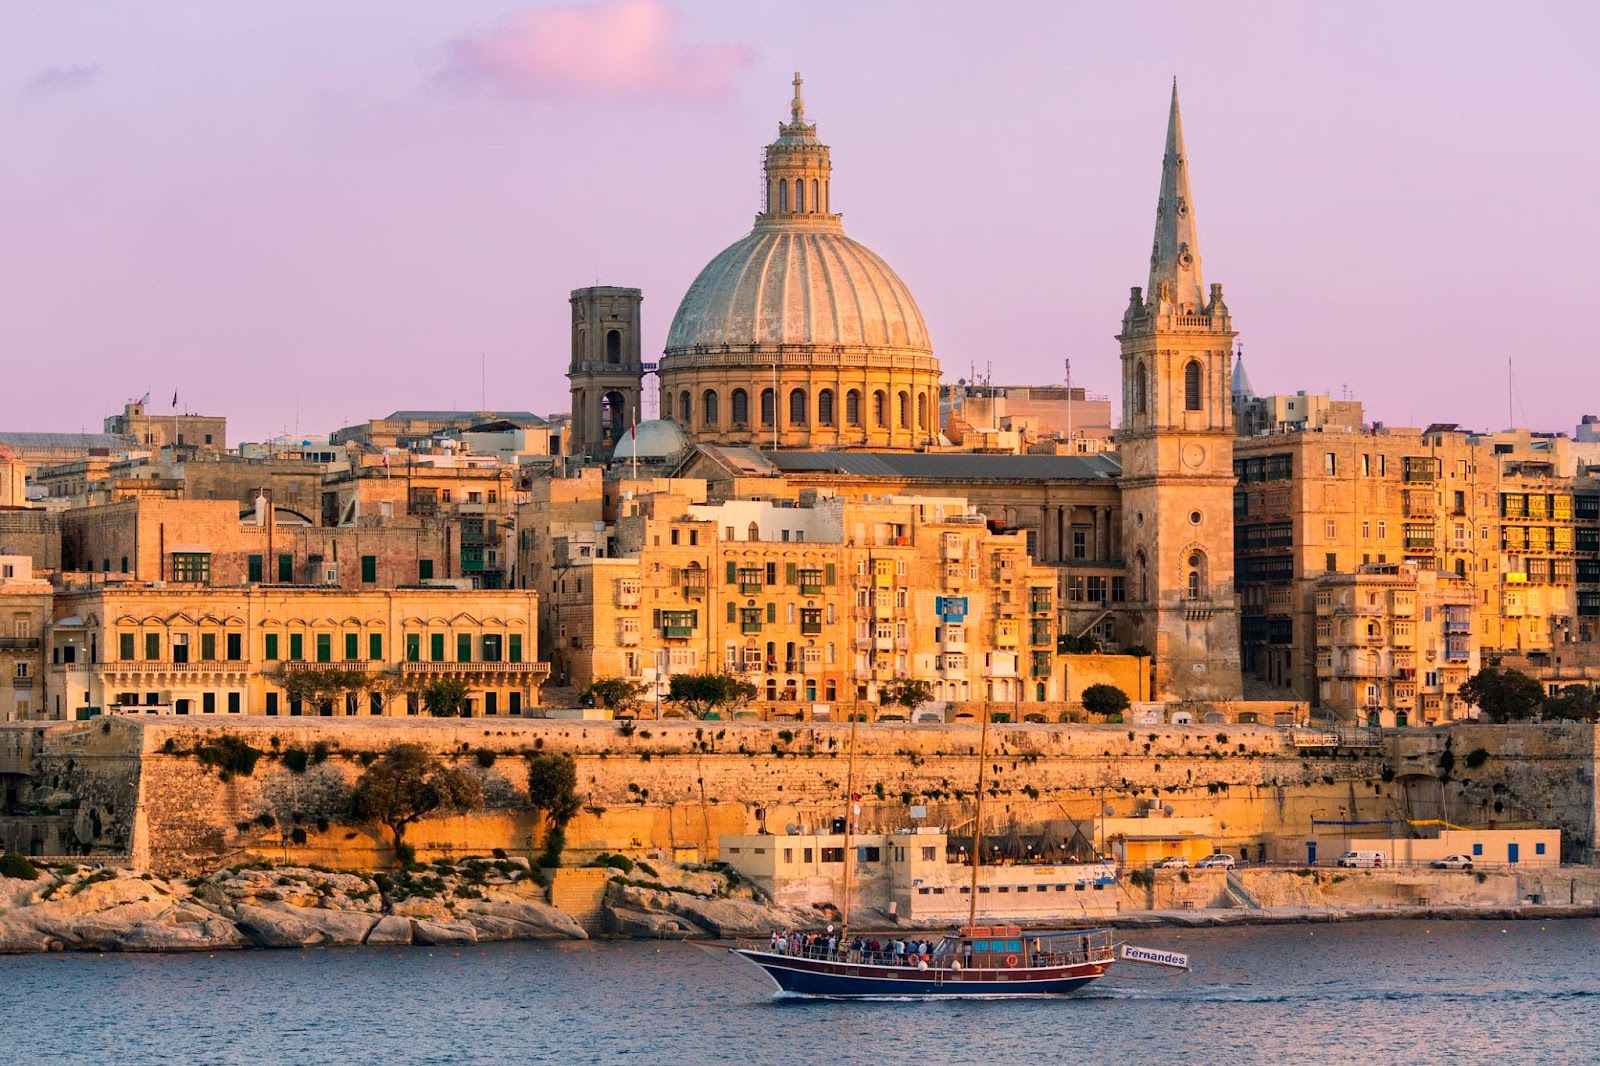 The harbourfront in Valletta, the capital city of Malta, with its distinctive tan coloured buildings